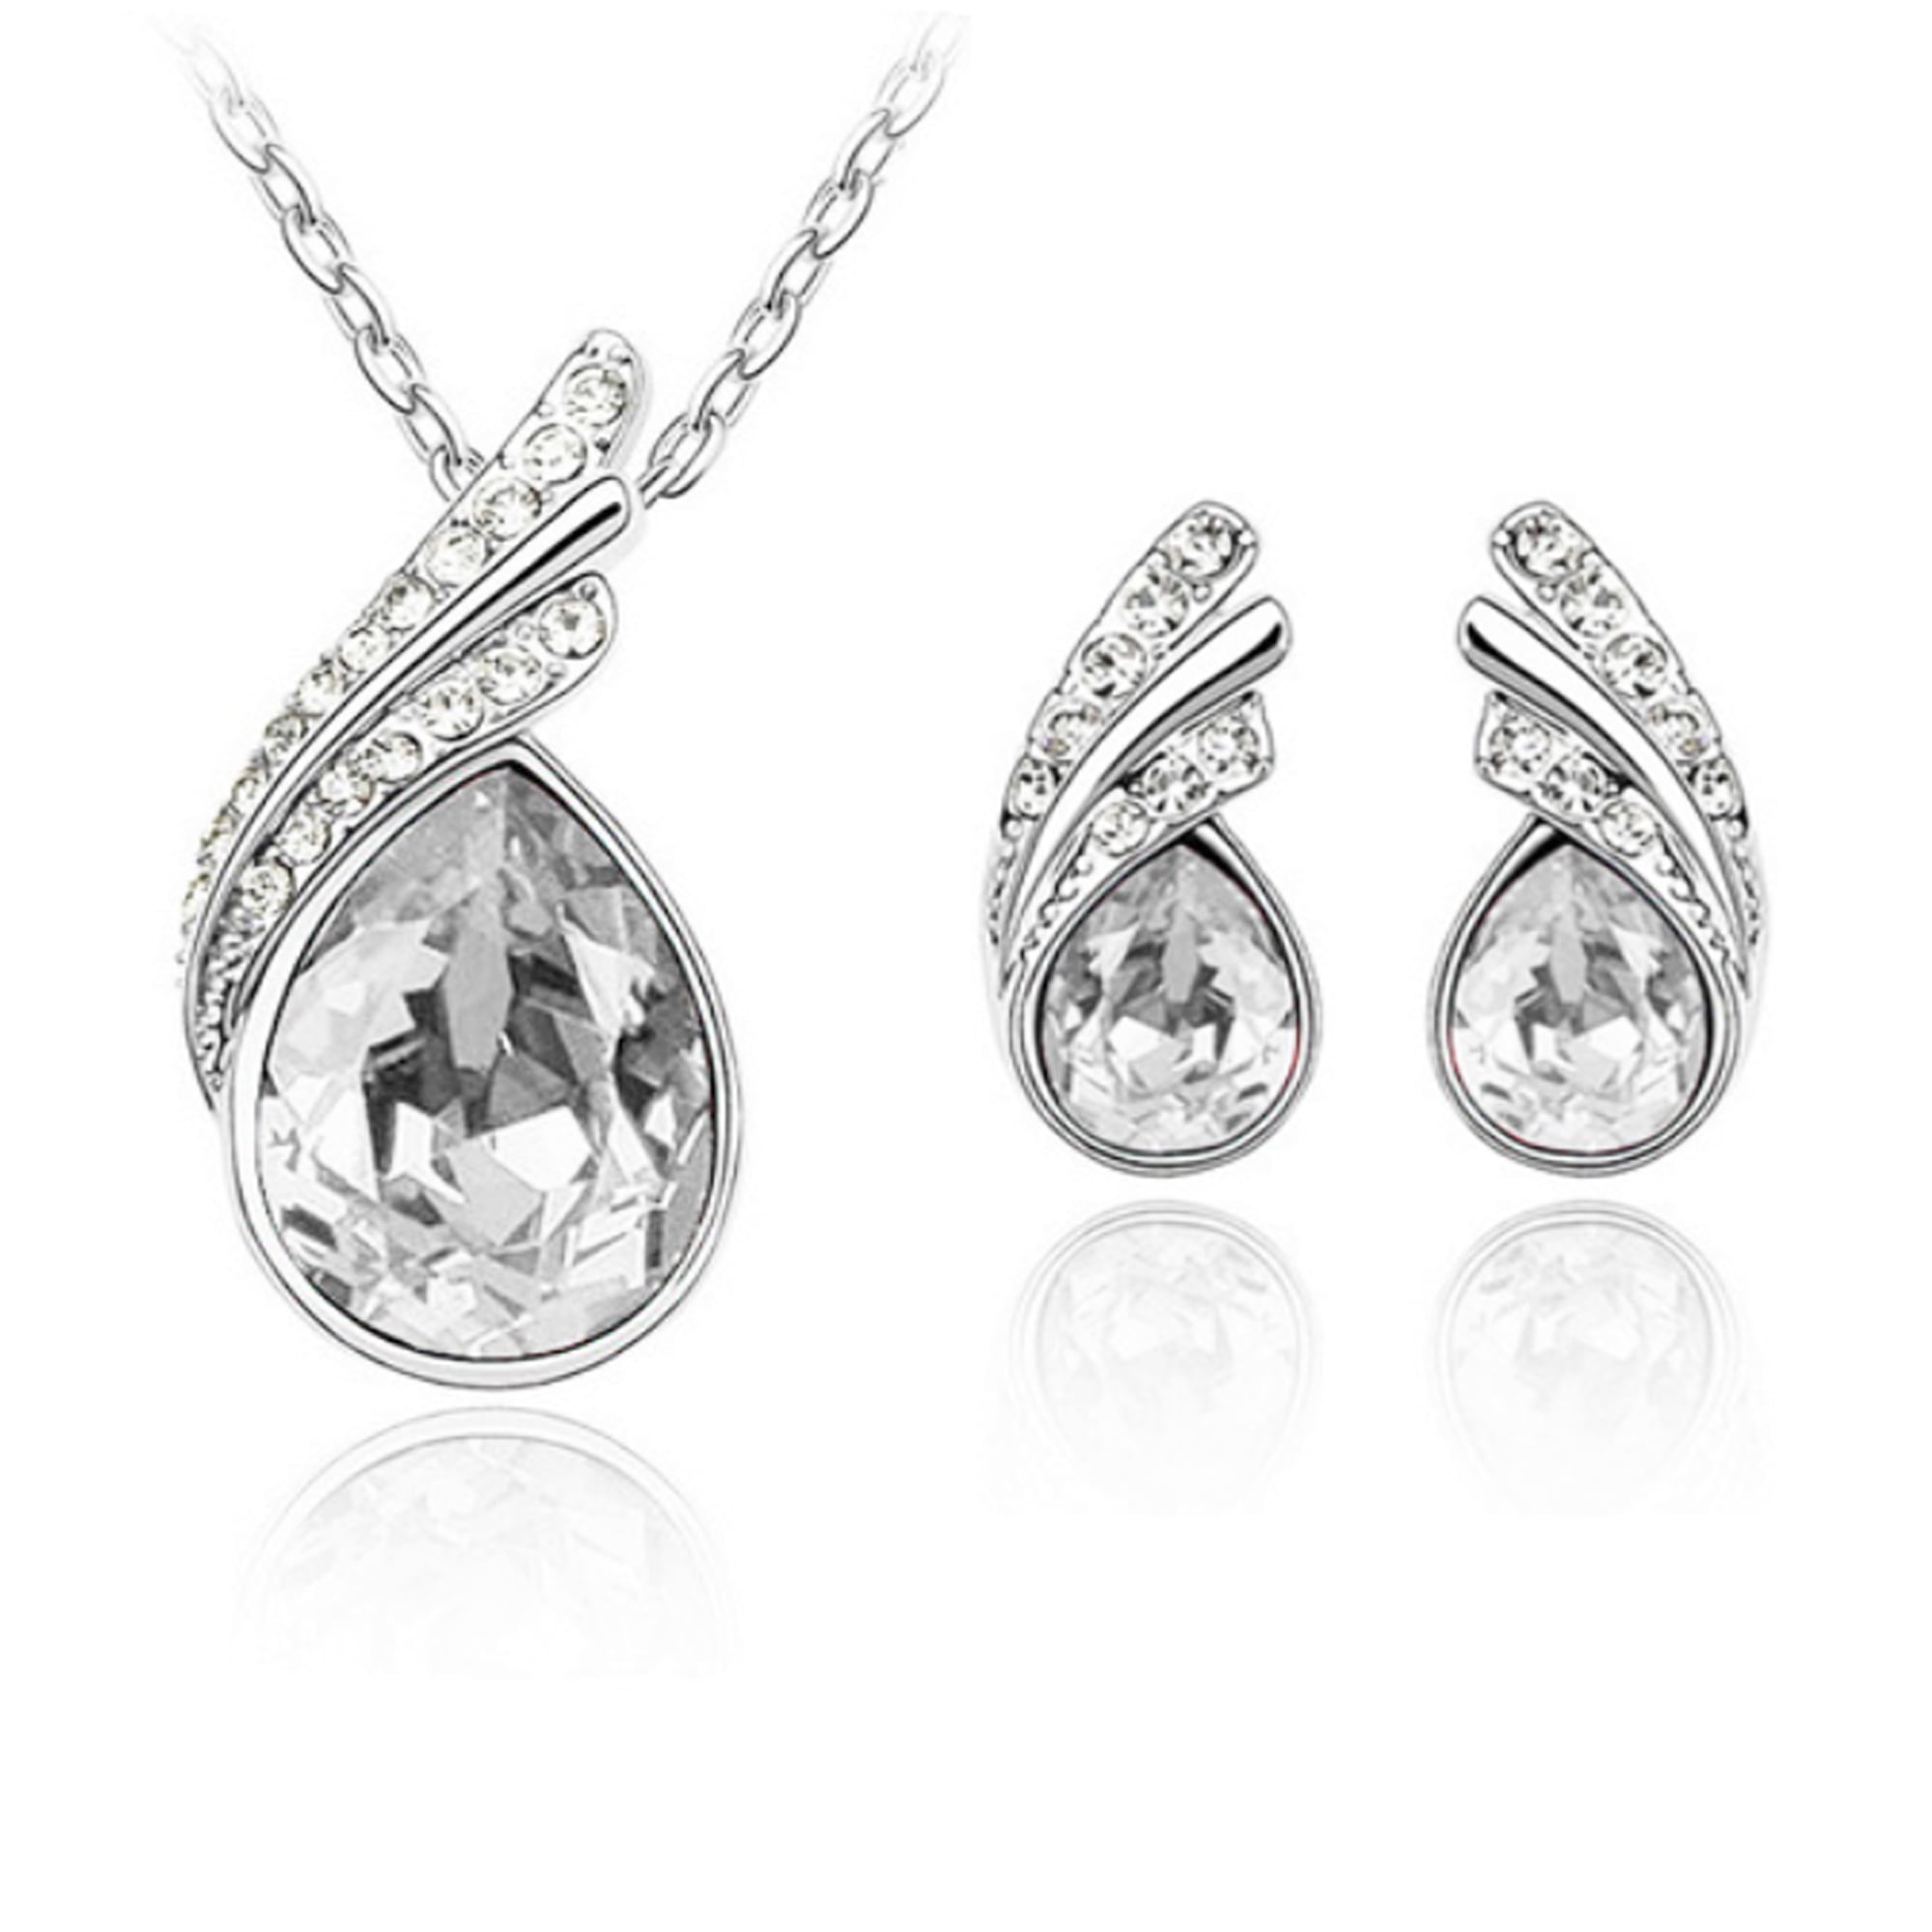 Women's Lovely Water Drop Crystal Pendant Necklace And Earrings Set Jewellery 